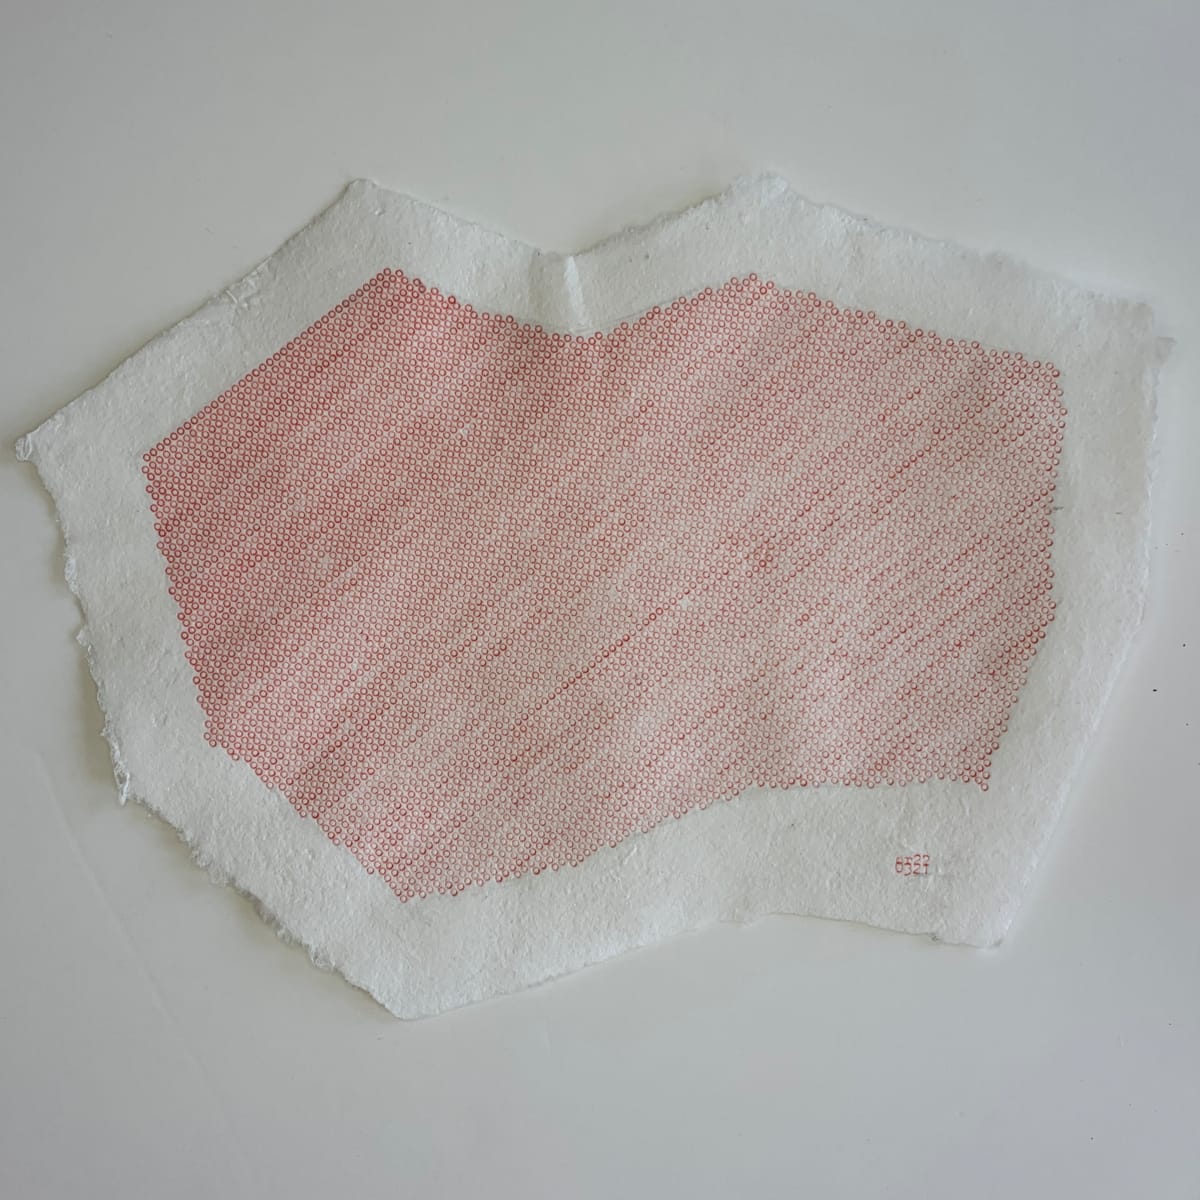 color study on polygonal handmade paper: red by Chad Reynolds 